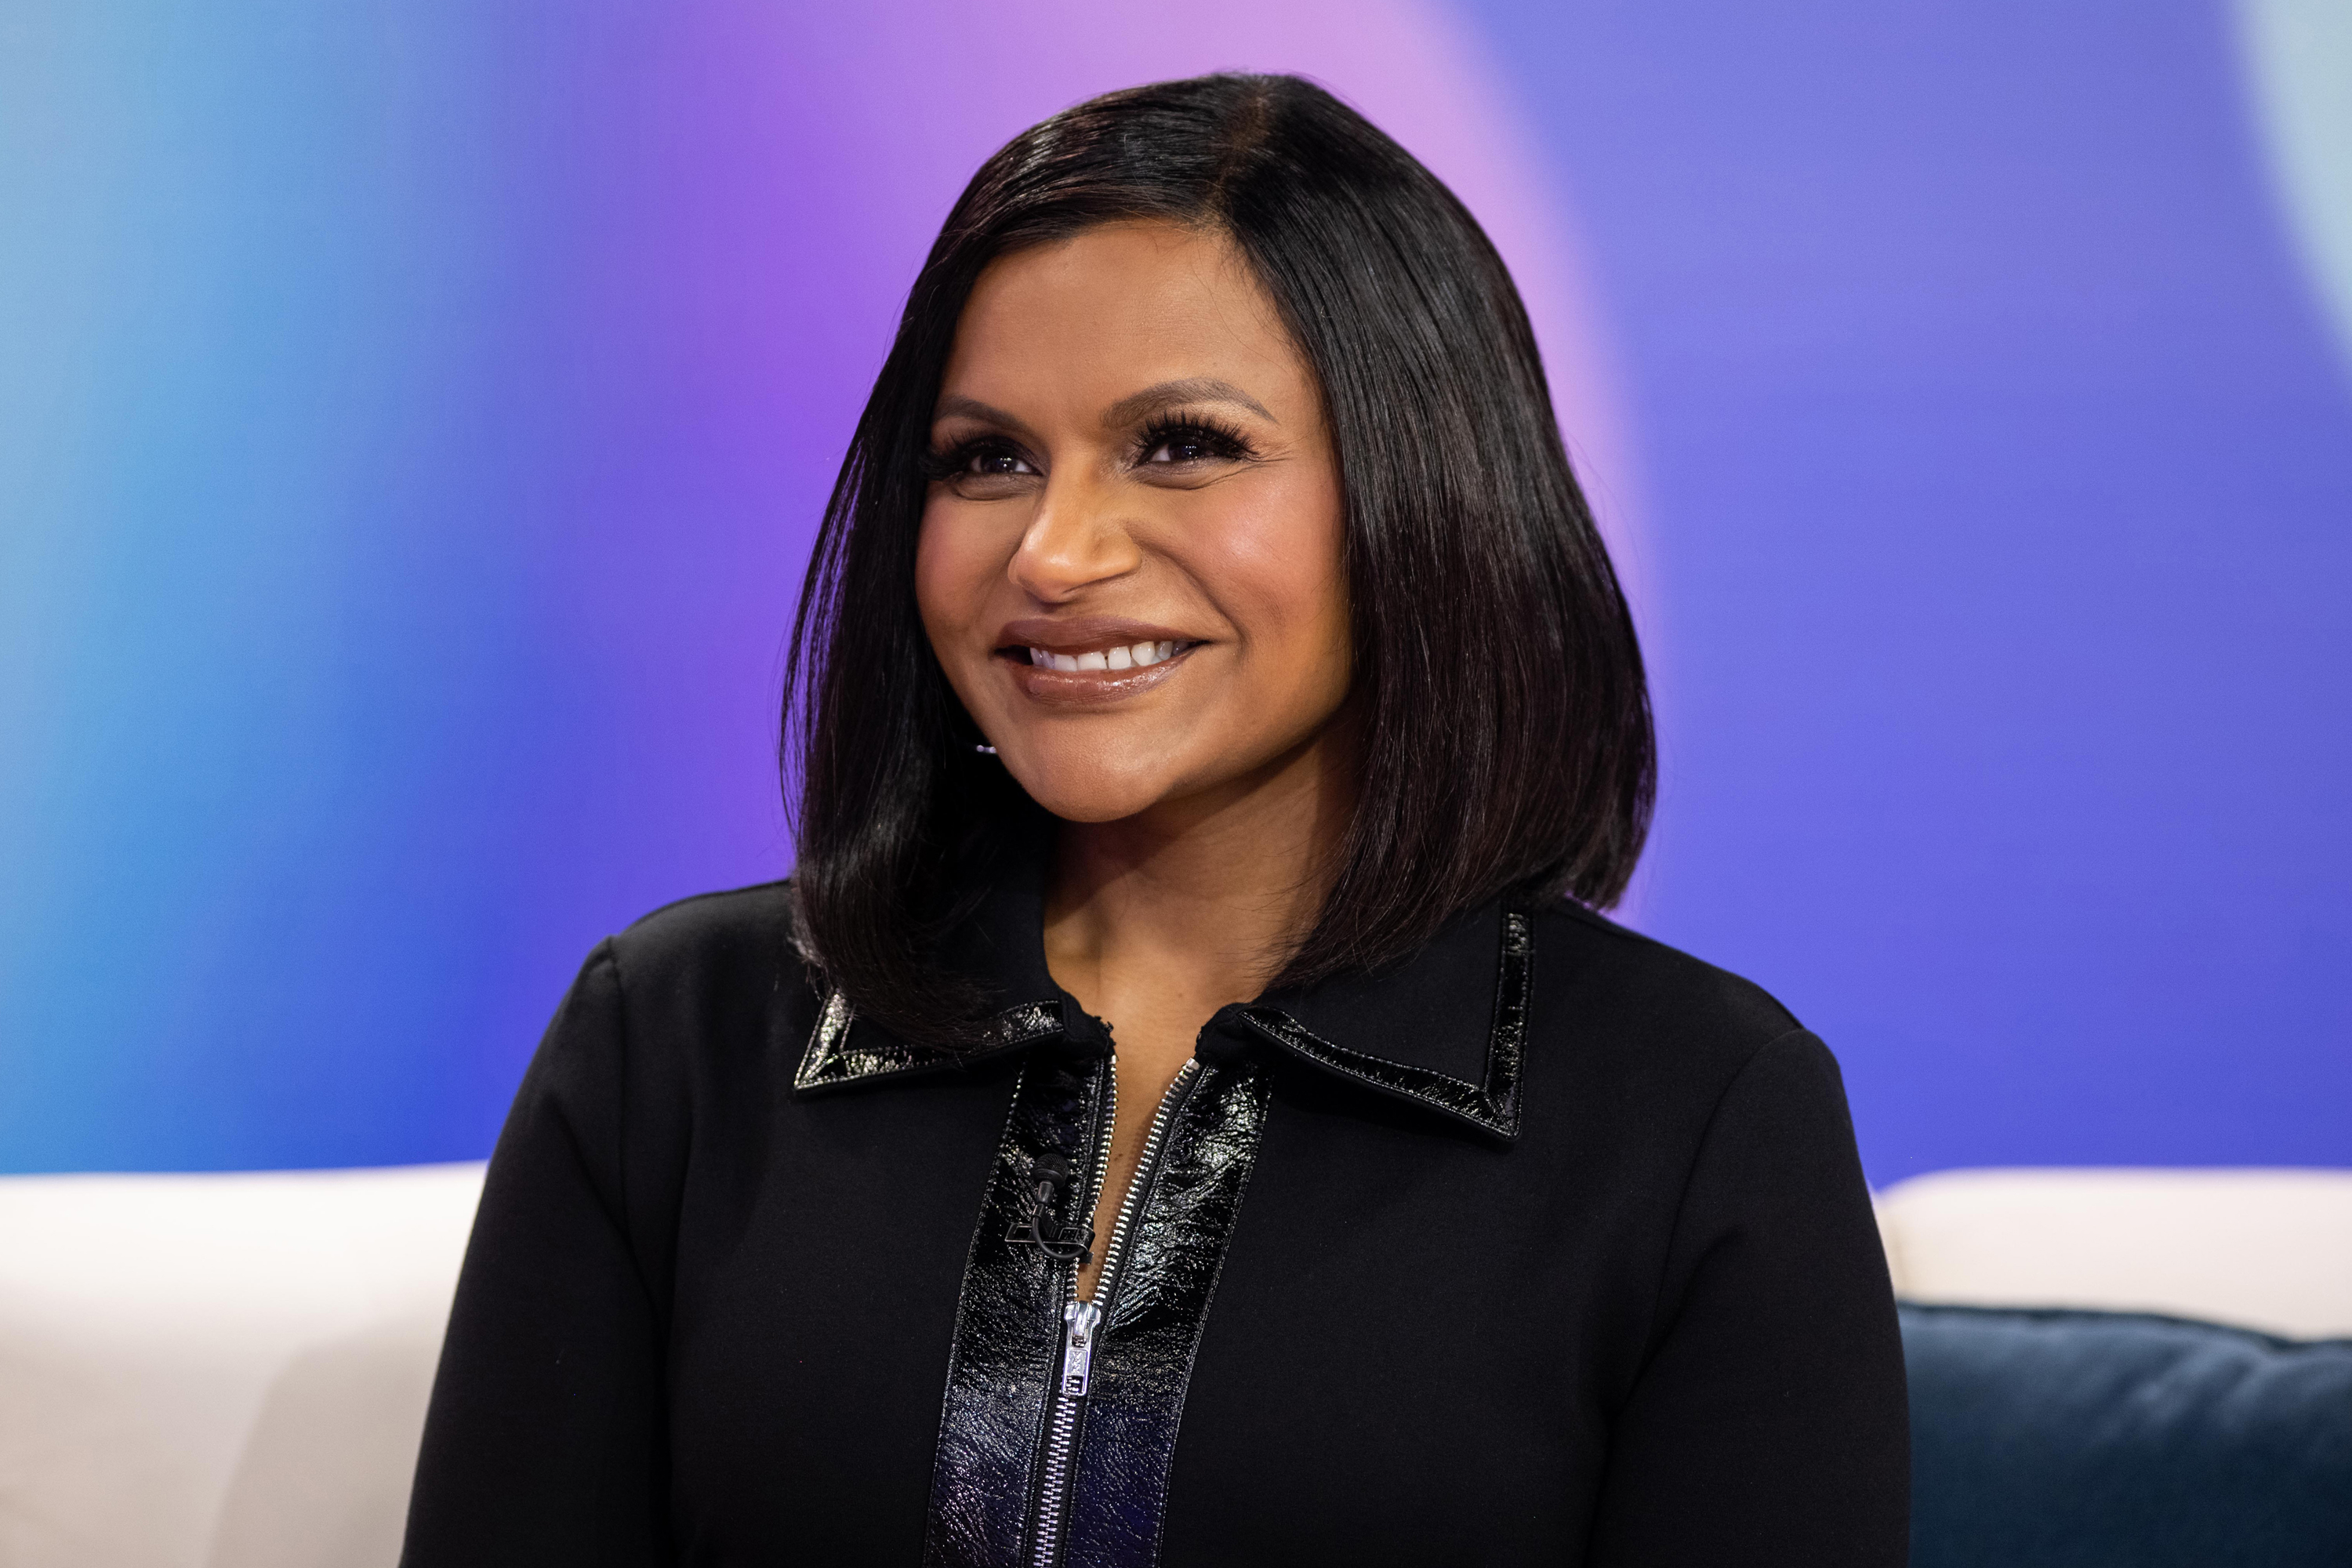 Mindy Kaling smiles while seated for a studio interview